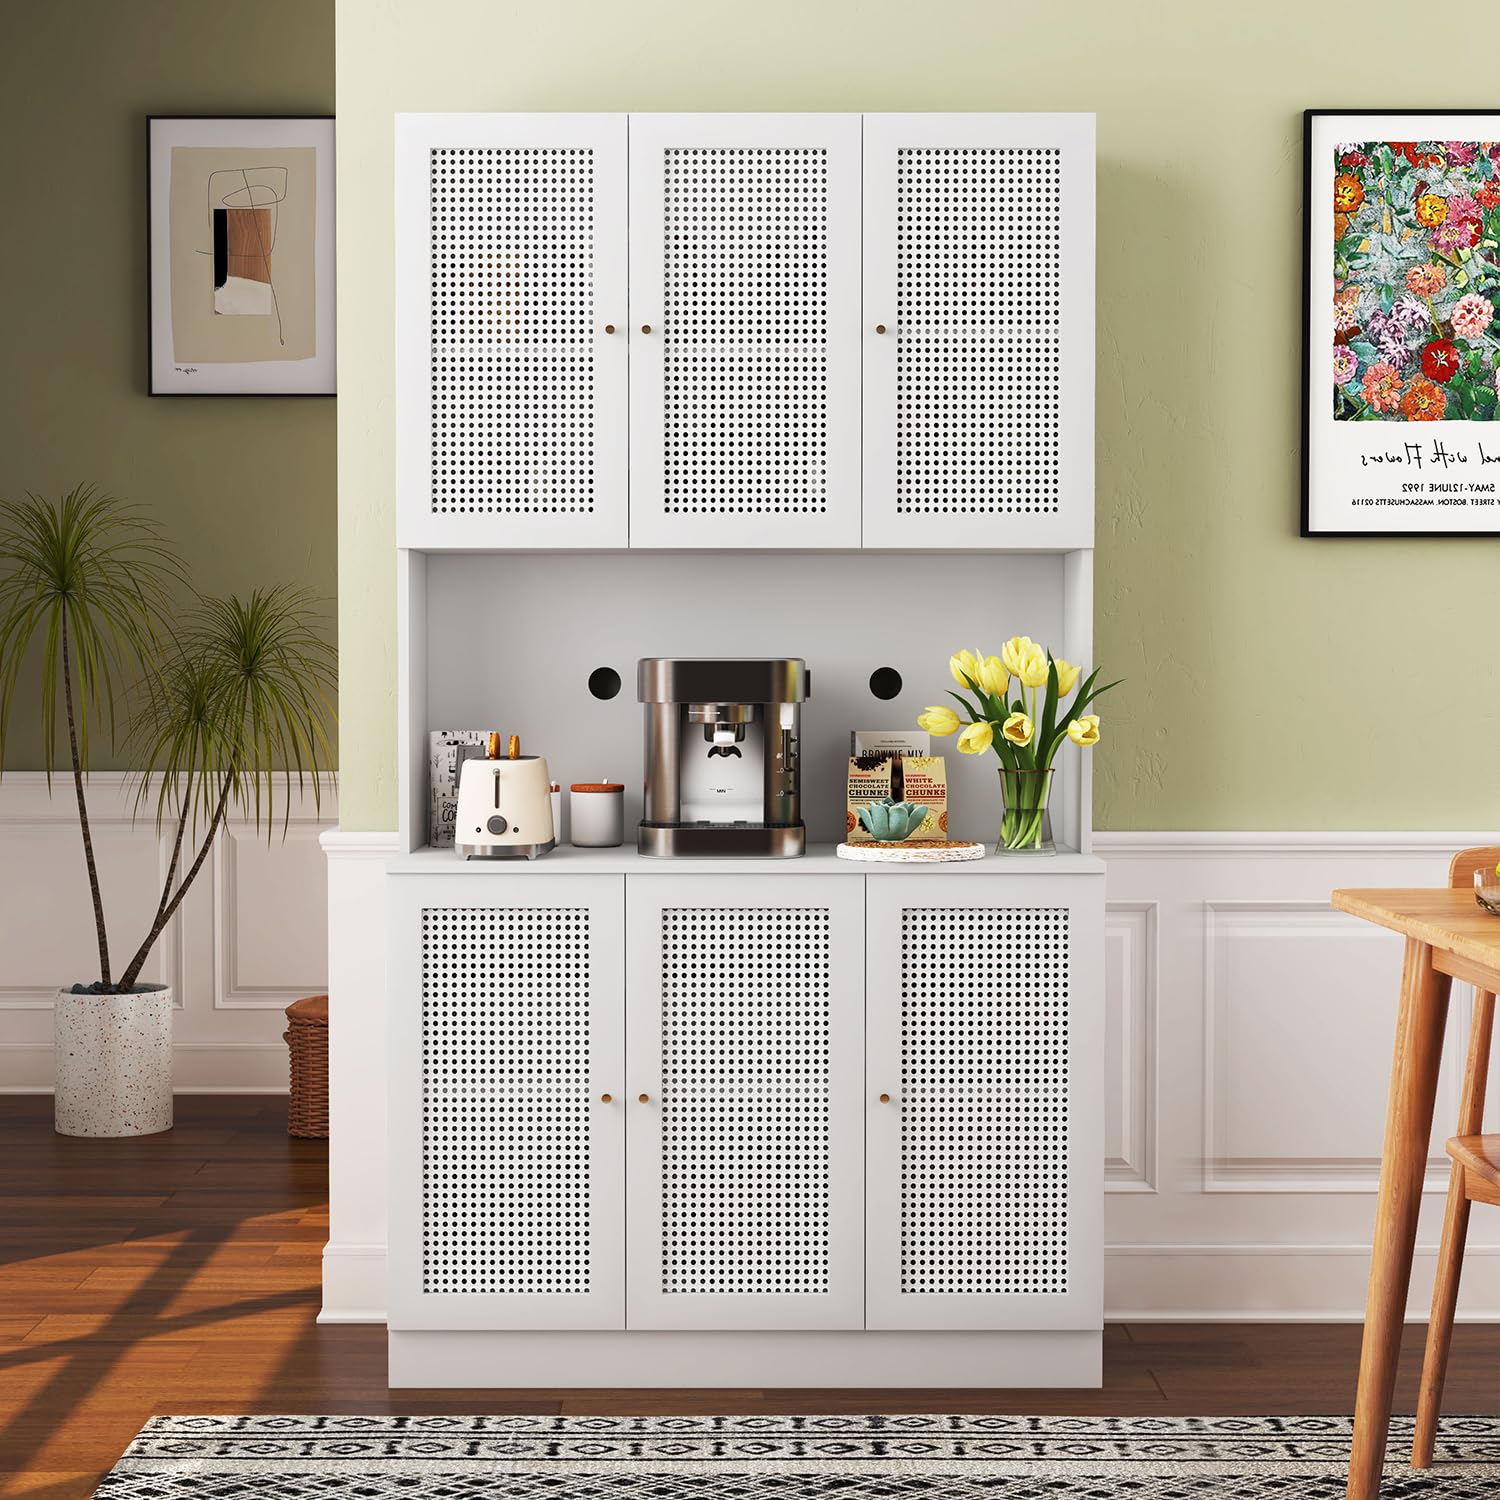 White 70"Tall Freestanding Metal Rattan Cabinet Kitchen Pantry Cabinet with 6 Doors